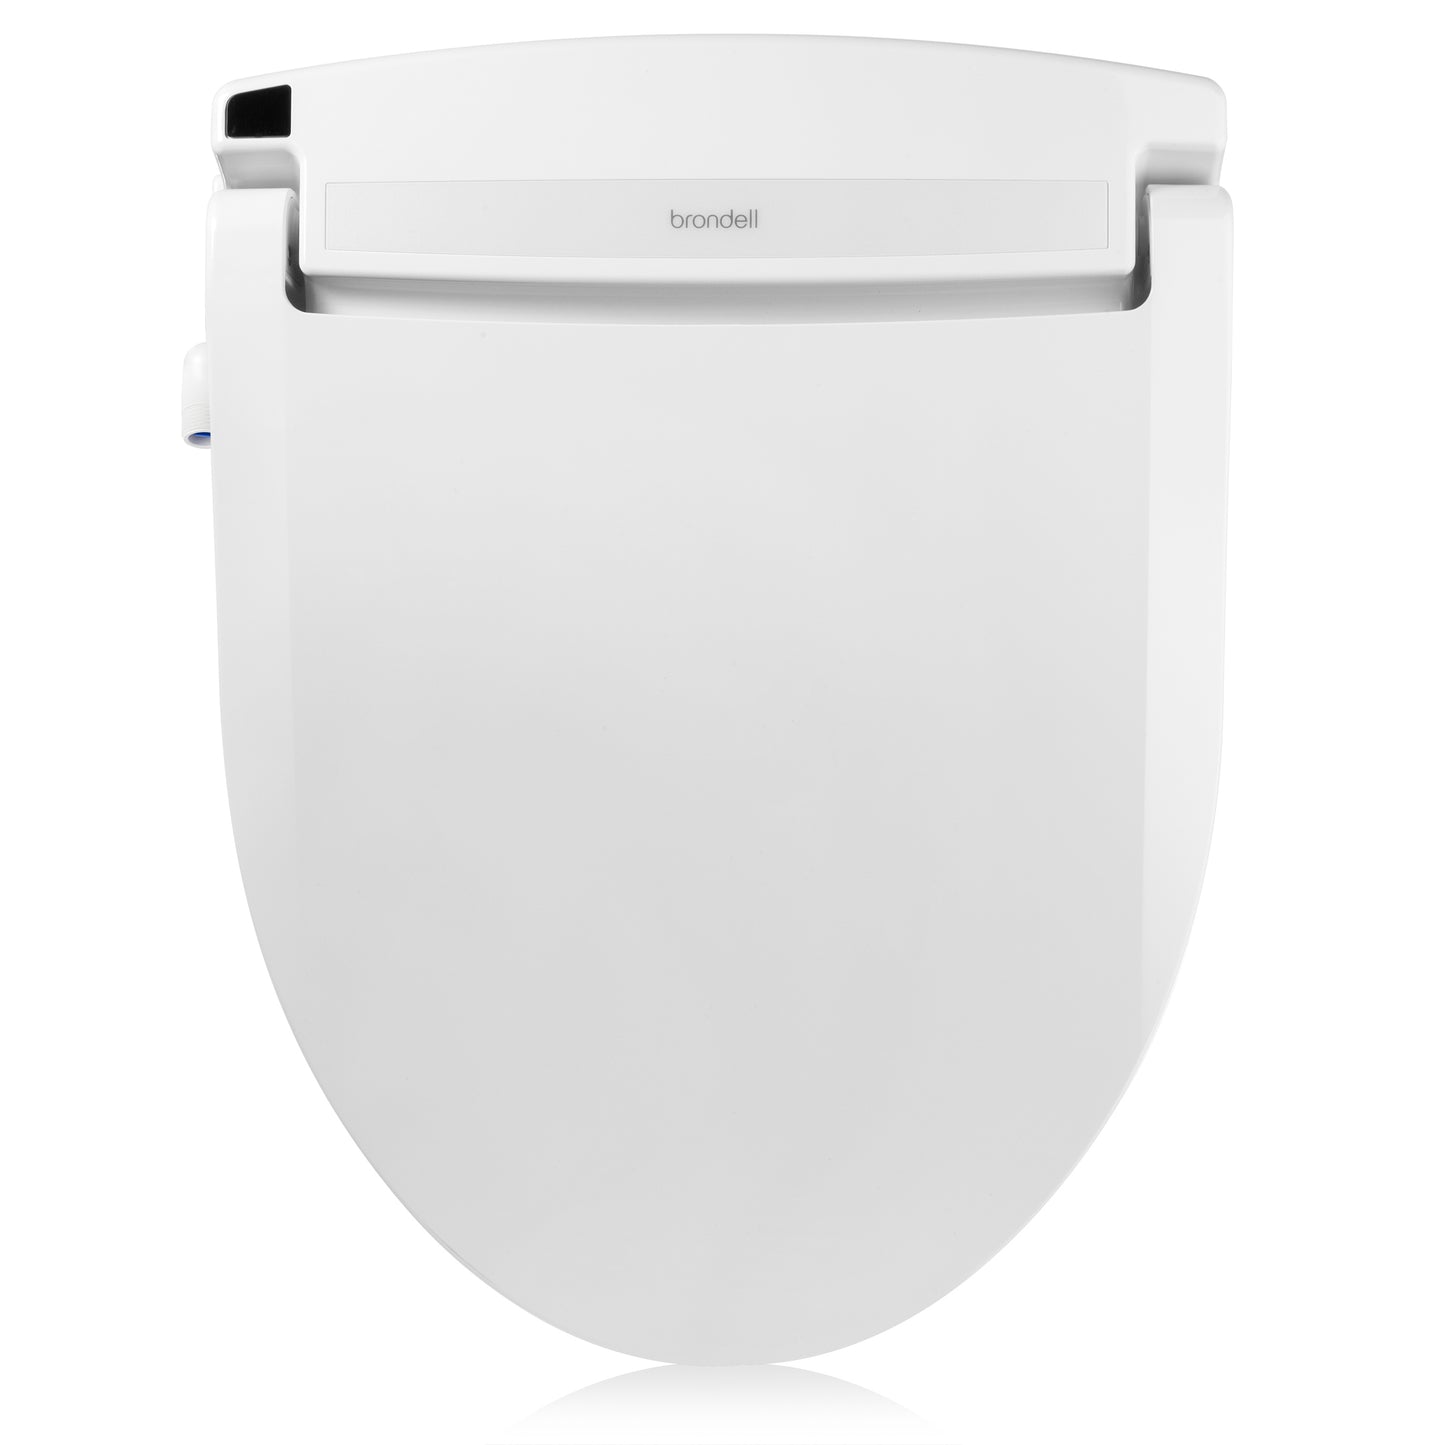 Swash Select DR802 Smart Bidet Seat with Warm Air Dryer and Deodorizer, Elongated or Round